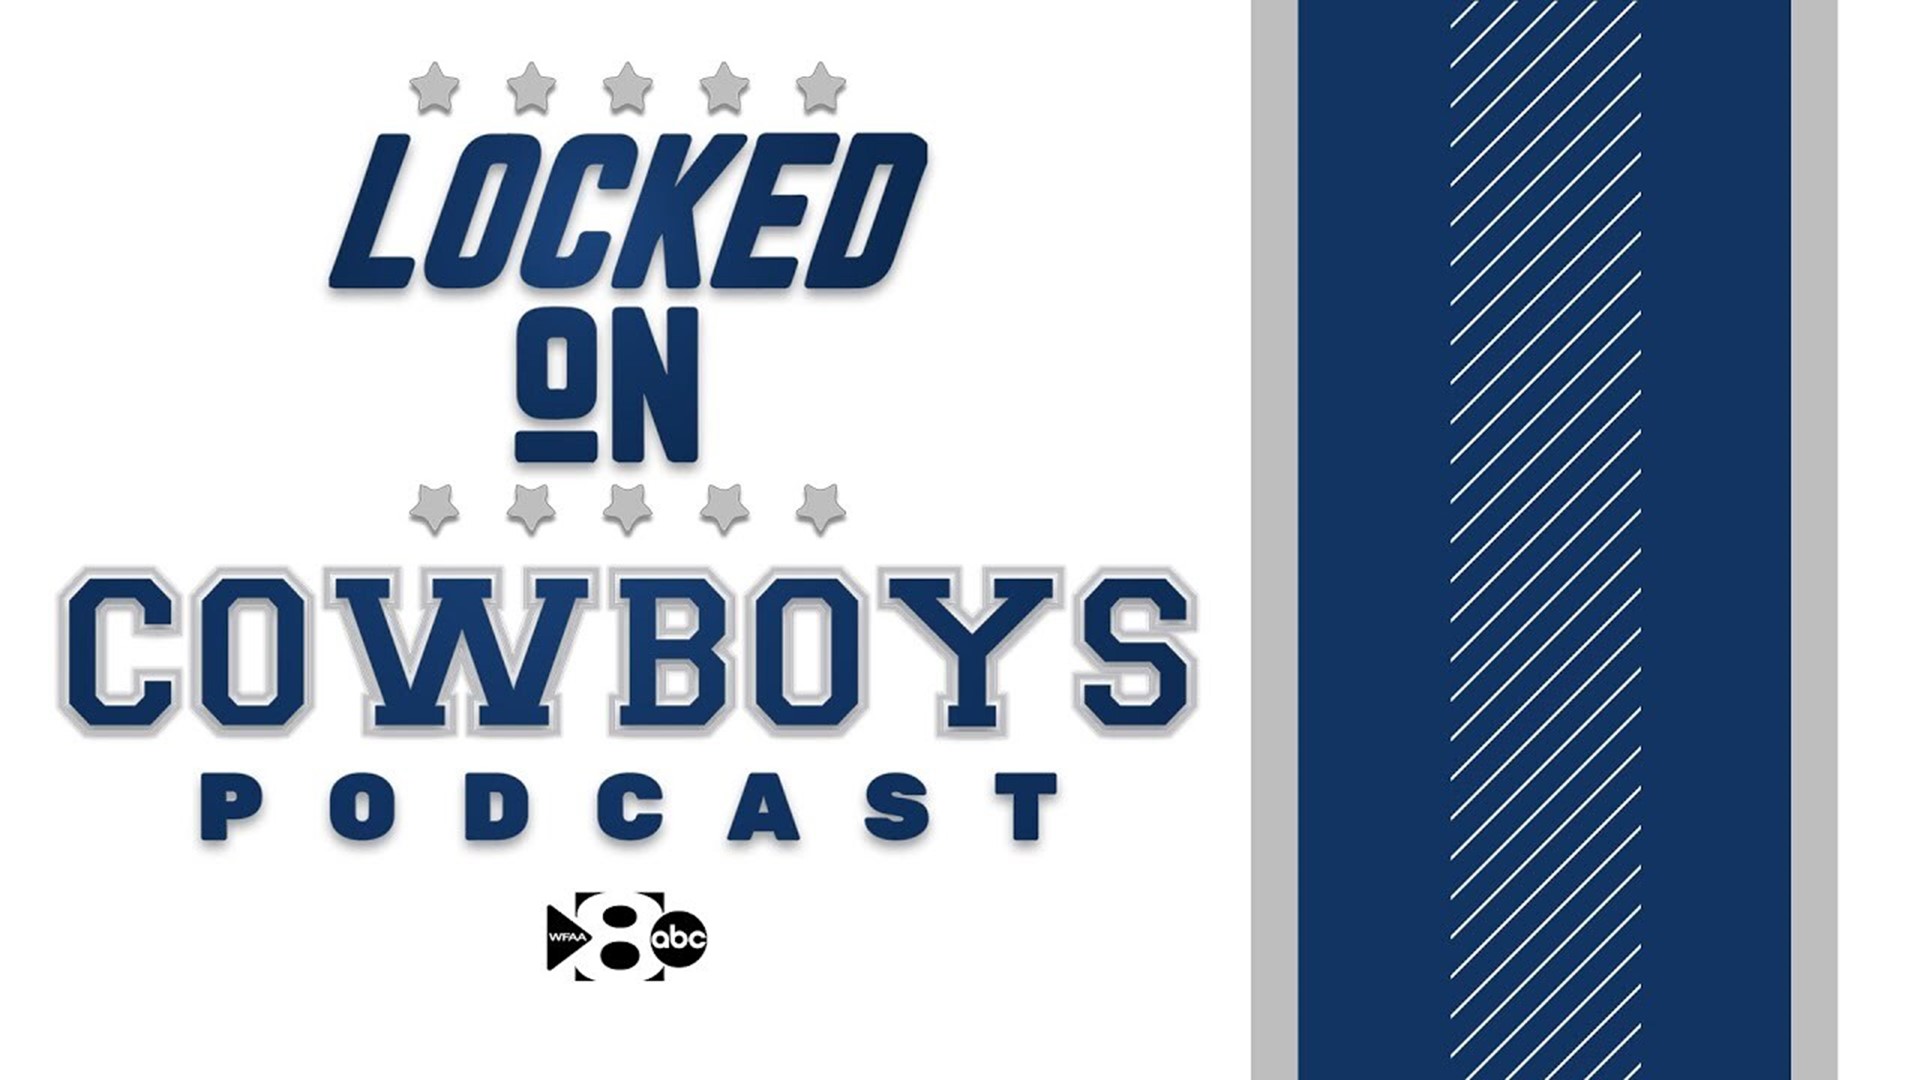 In this episode of Locked On Cowboys, Marcus Mosher and Landon McCool discuss the Cowboys selecting Micah Parsons at No. 12 and the trade that made it possible.